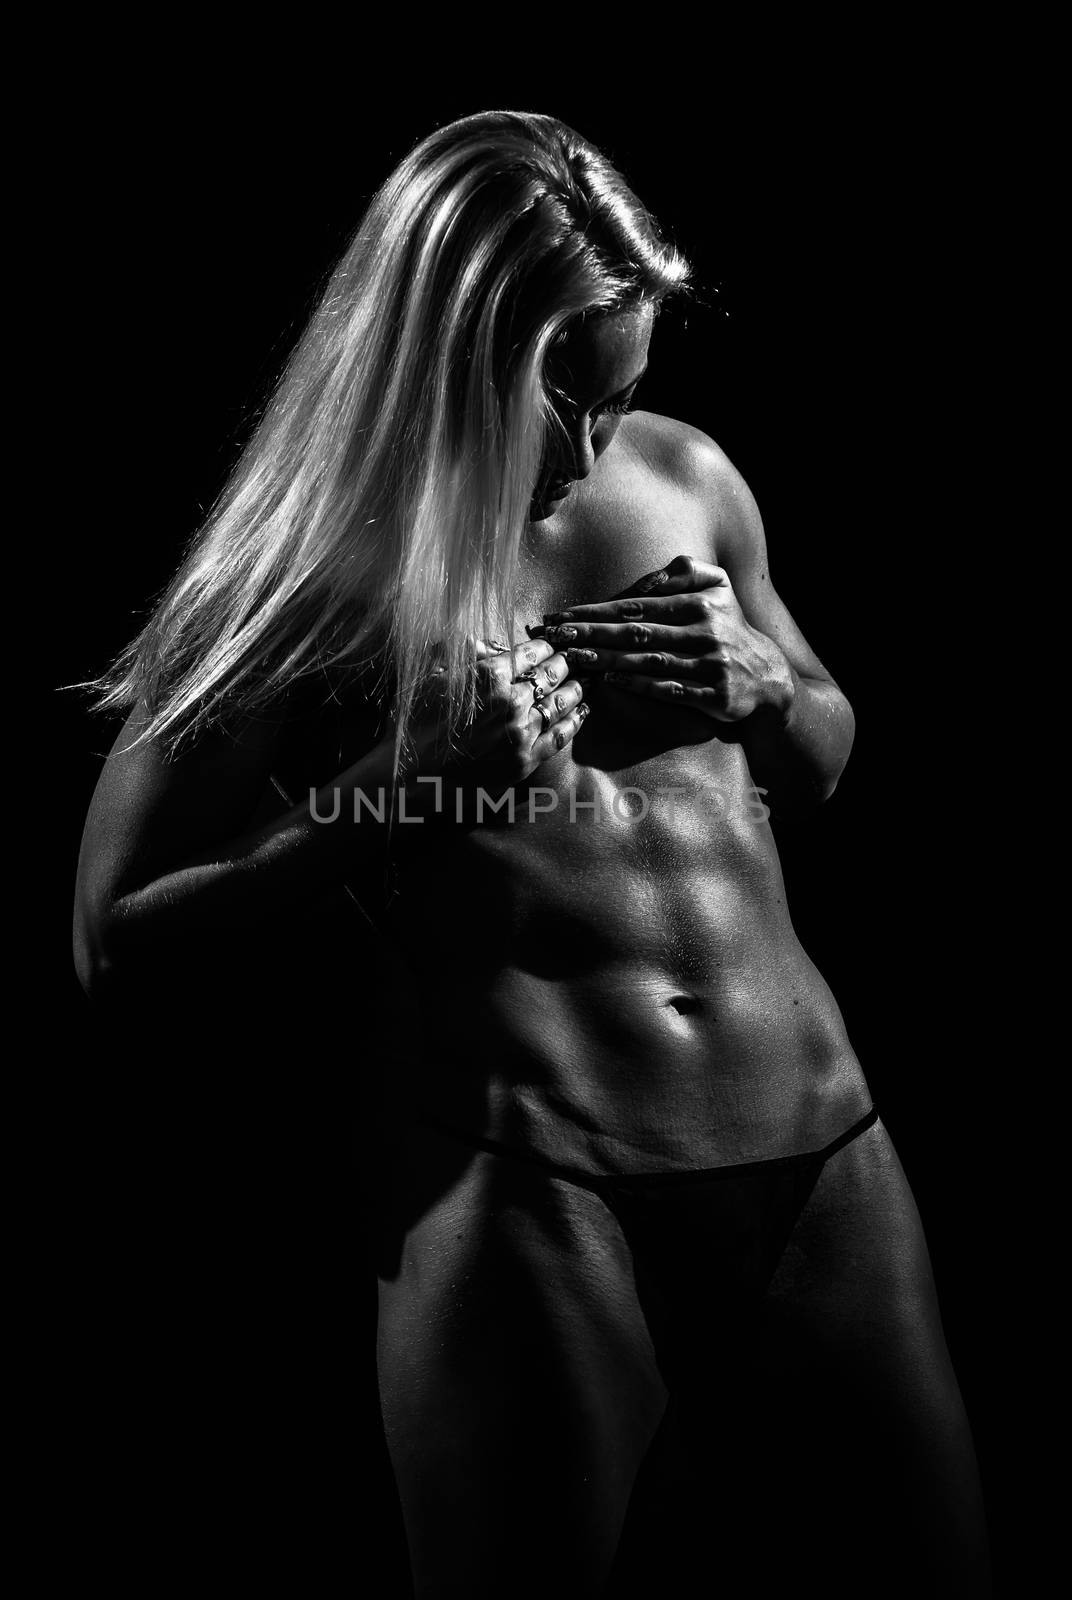 Black and white image of a muscular female against black background.